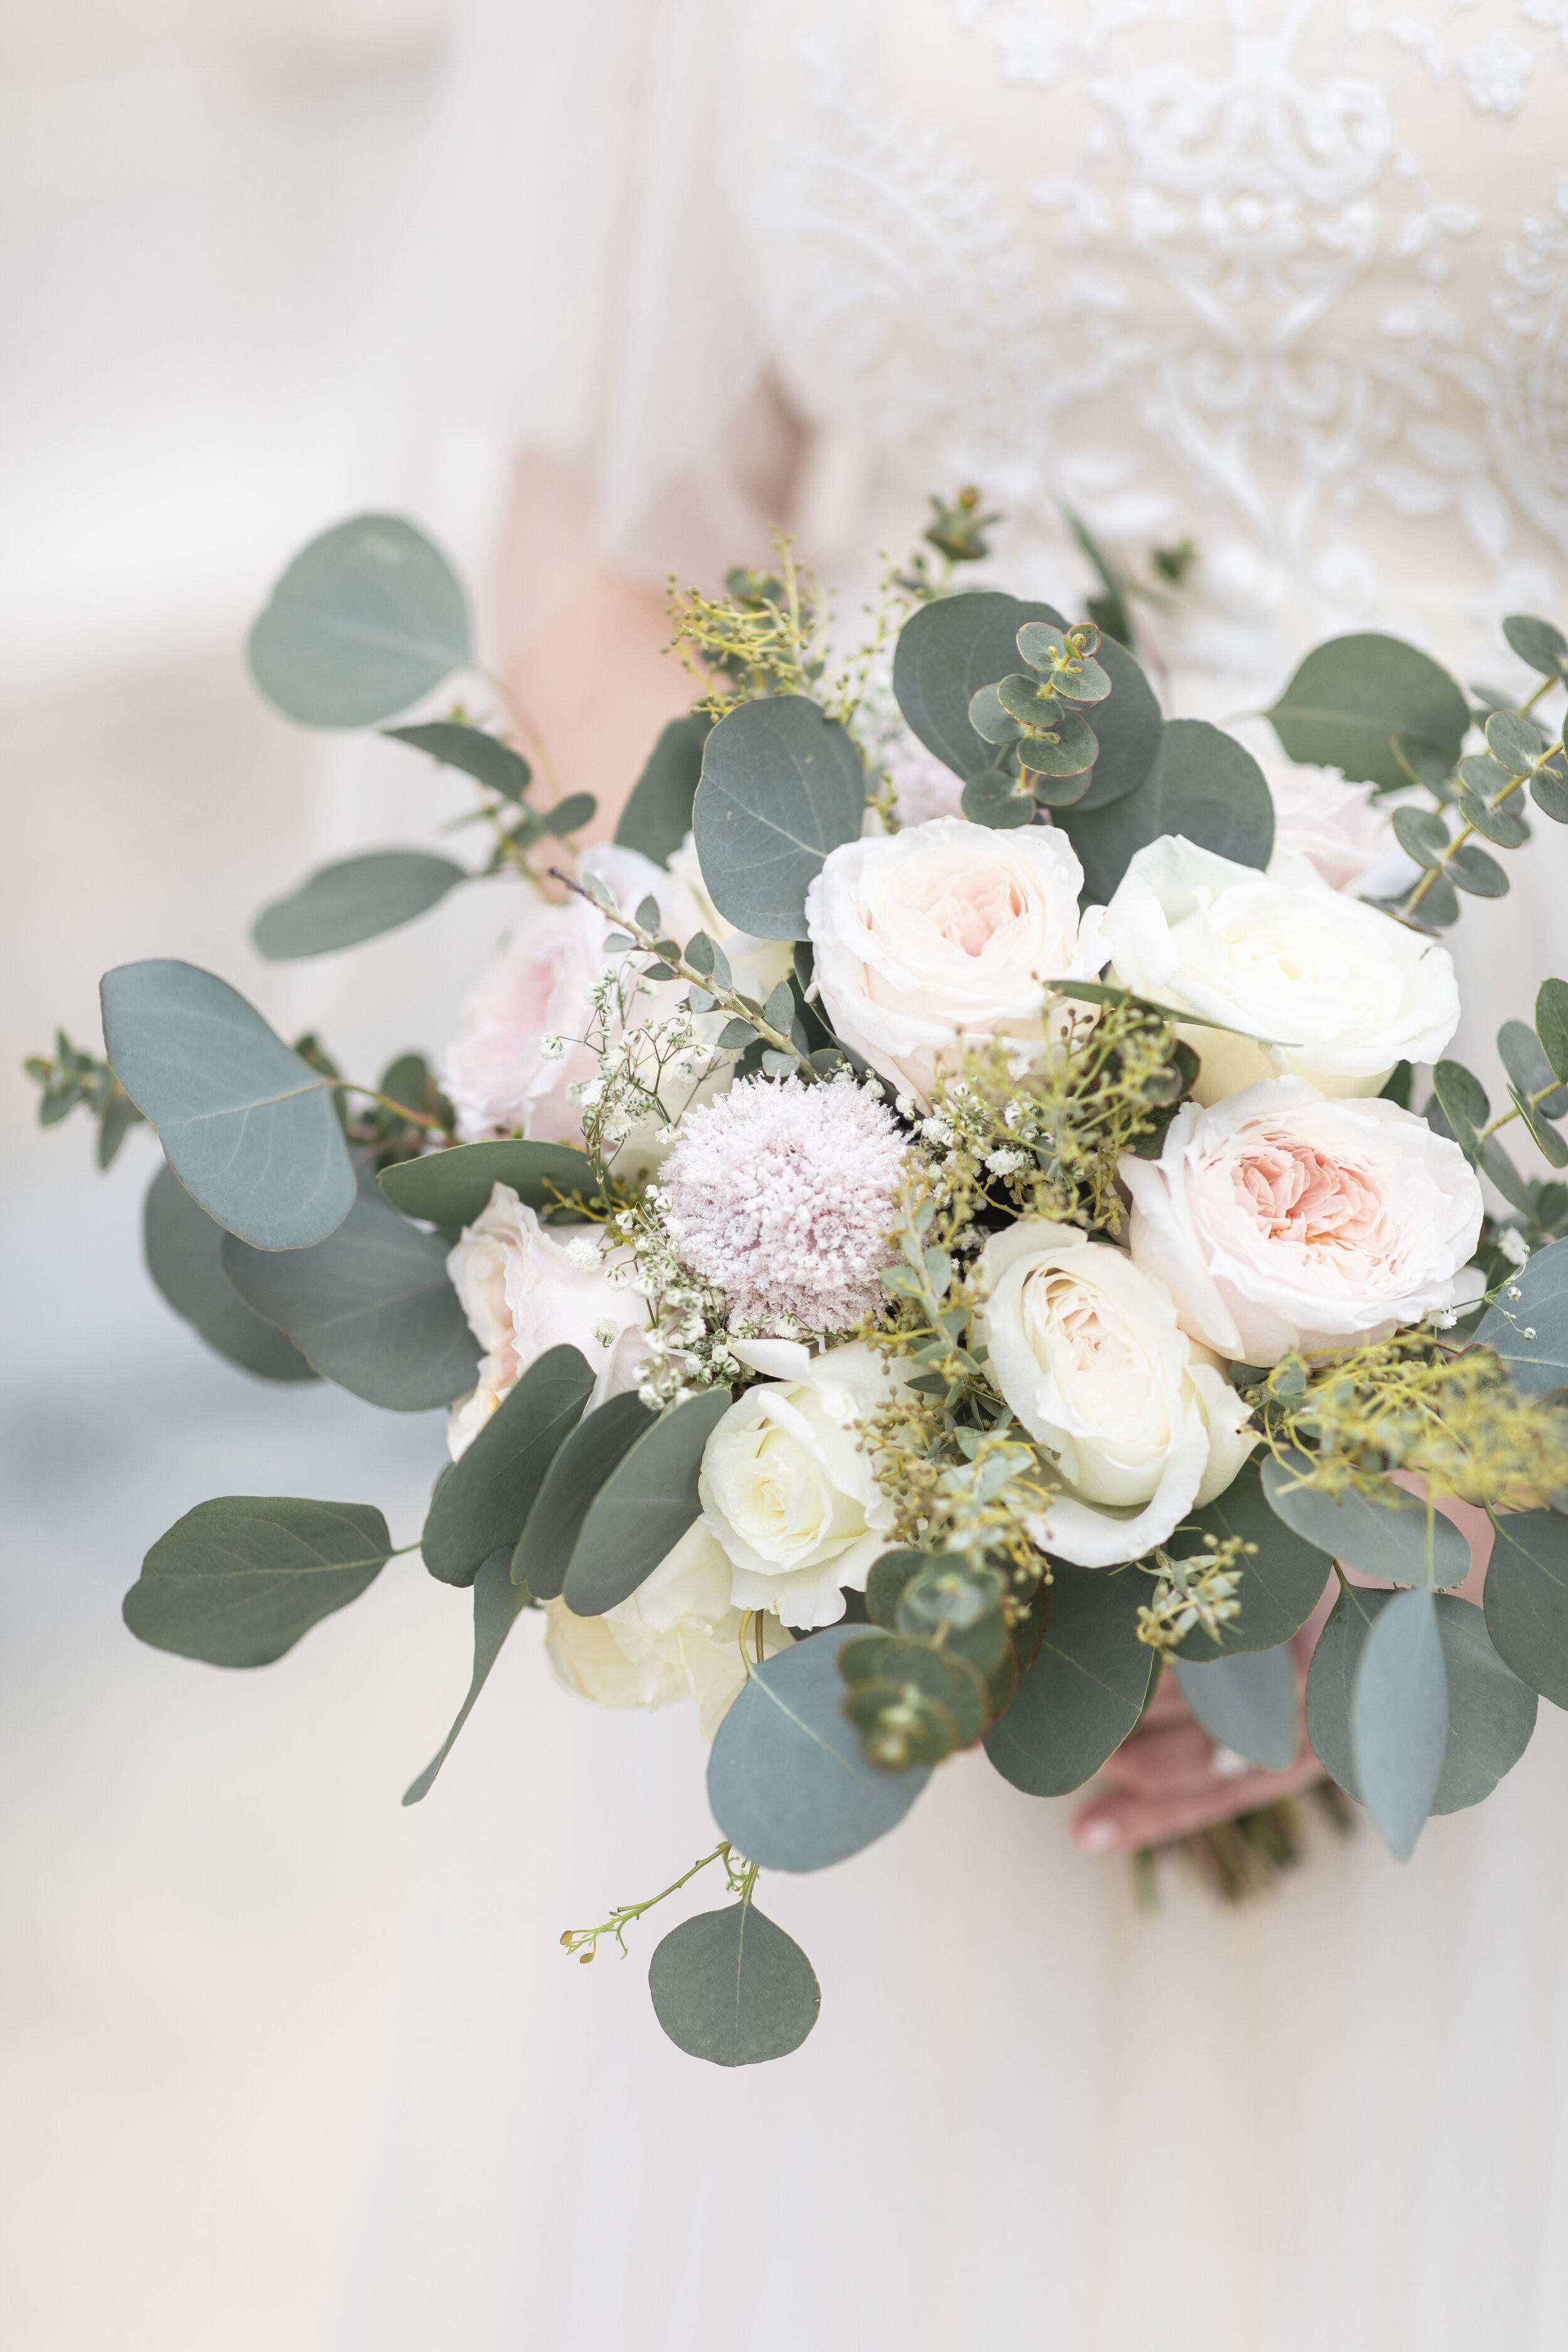  light pink and sage wedding bouquet trendy wedding flowers on-trend wedding bouquet sage greenery rose and ranuculus bouquet fresh wedding flowers fake flowers real flowers bouquet ideas clarity lane photography &nbsp;#claritylanephotography #profes